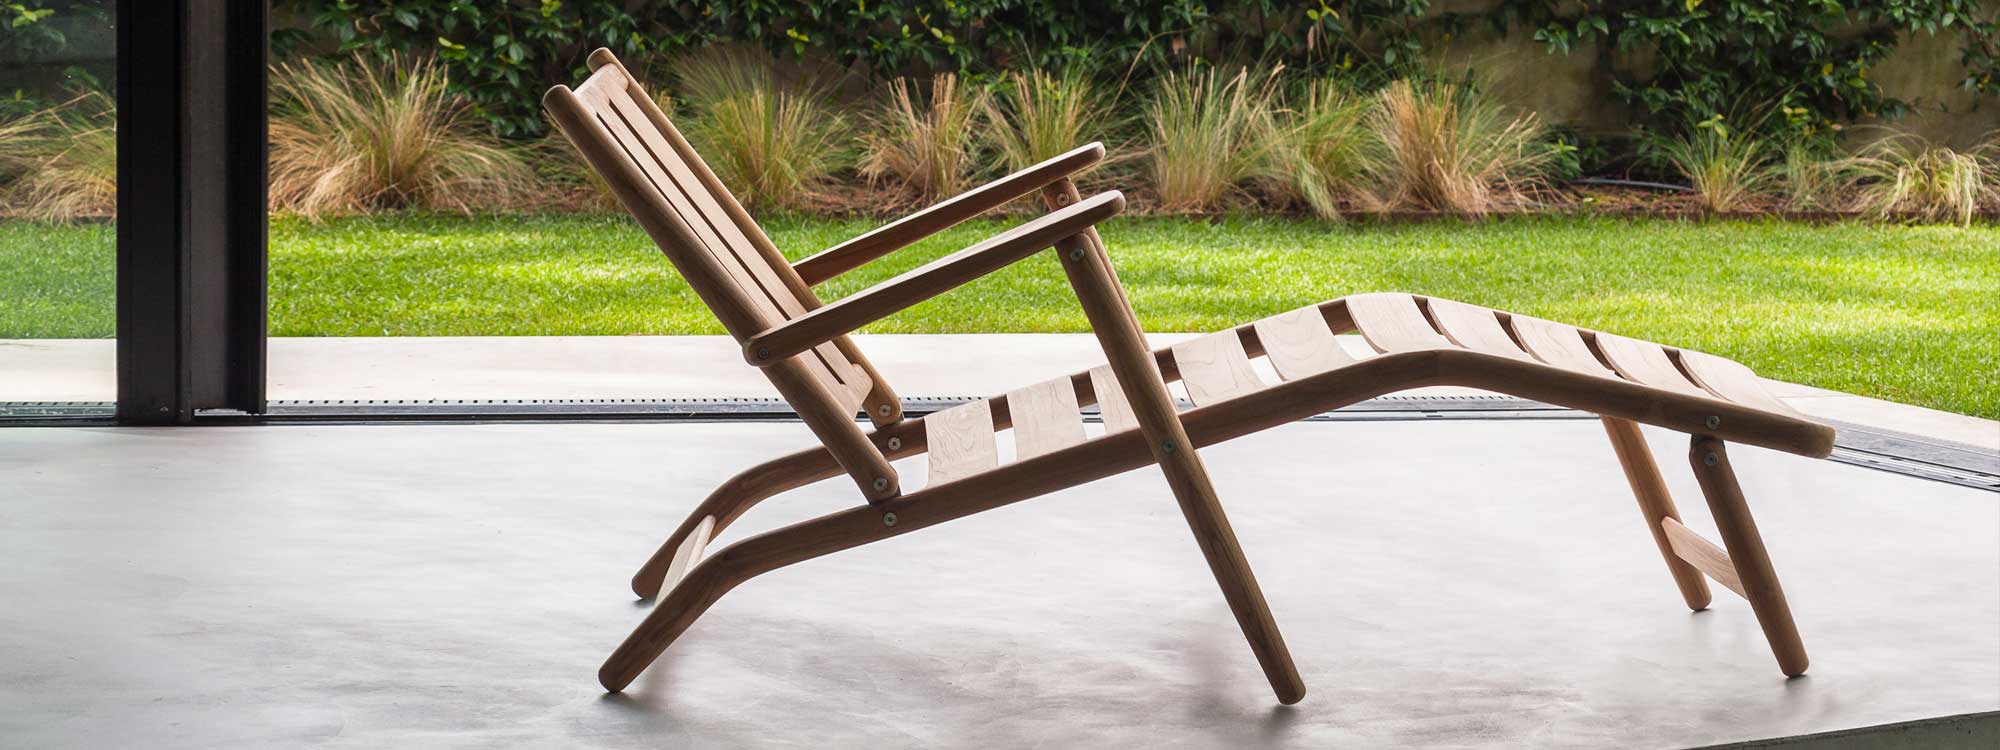 Image of side view of RODA Levante teak steamer chair on poured concrete floor with lawn and architectural grasses in background